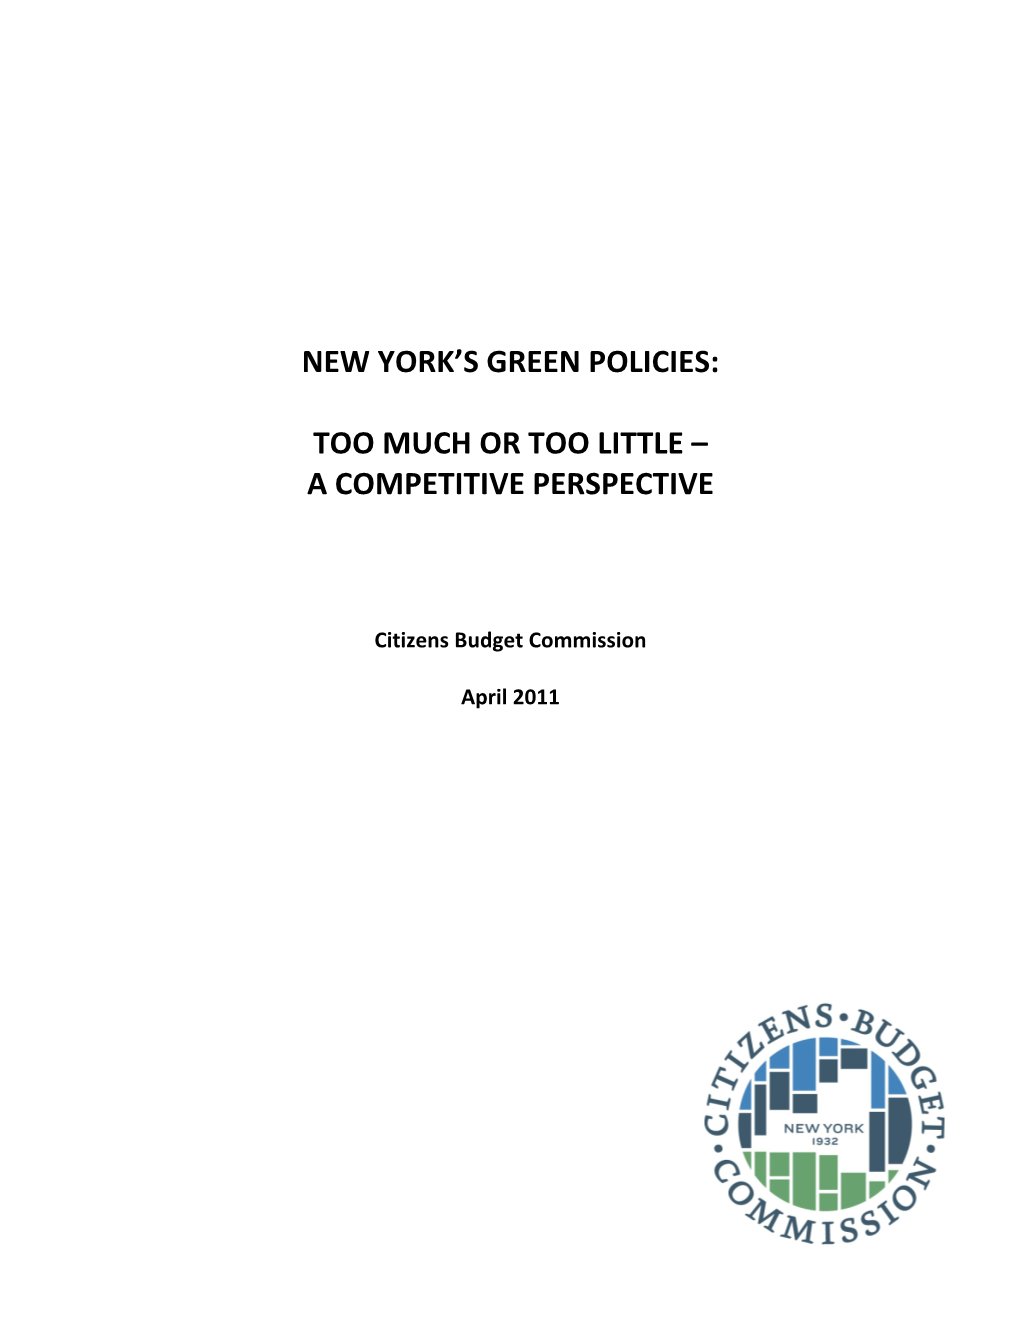 New York's Green Policies